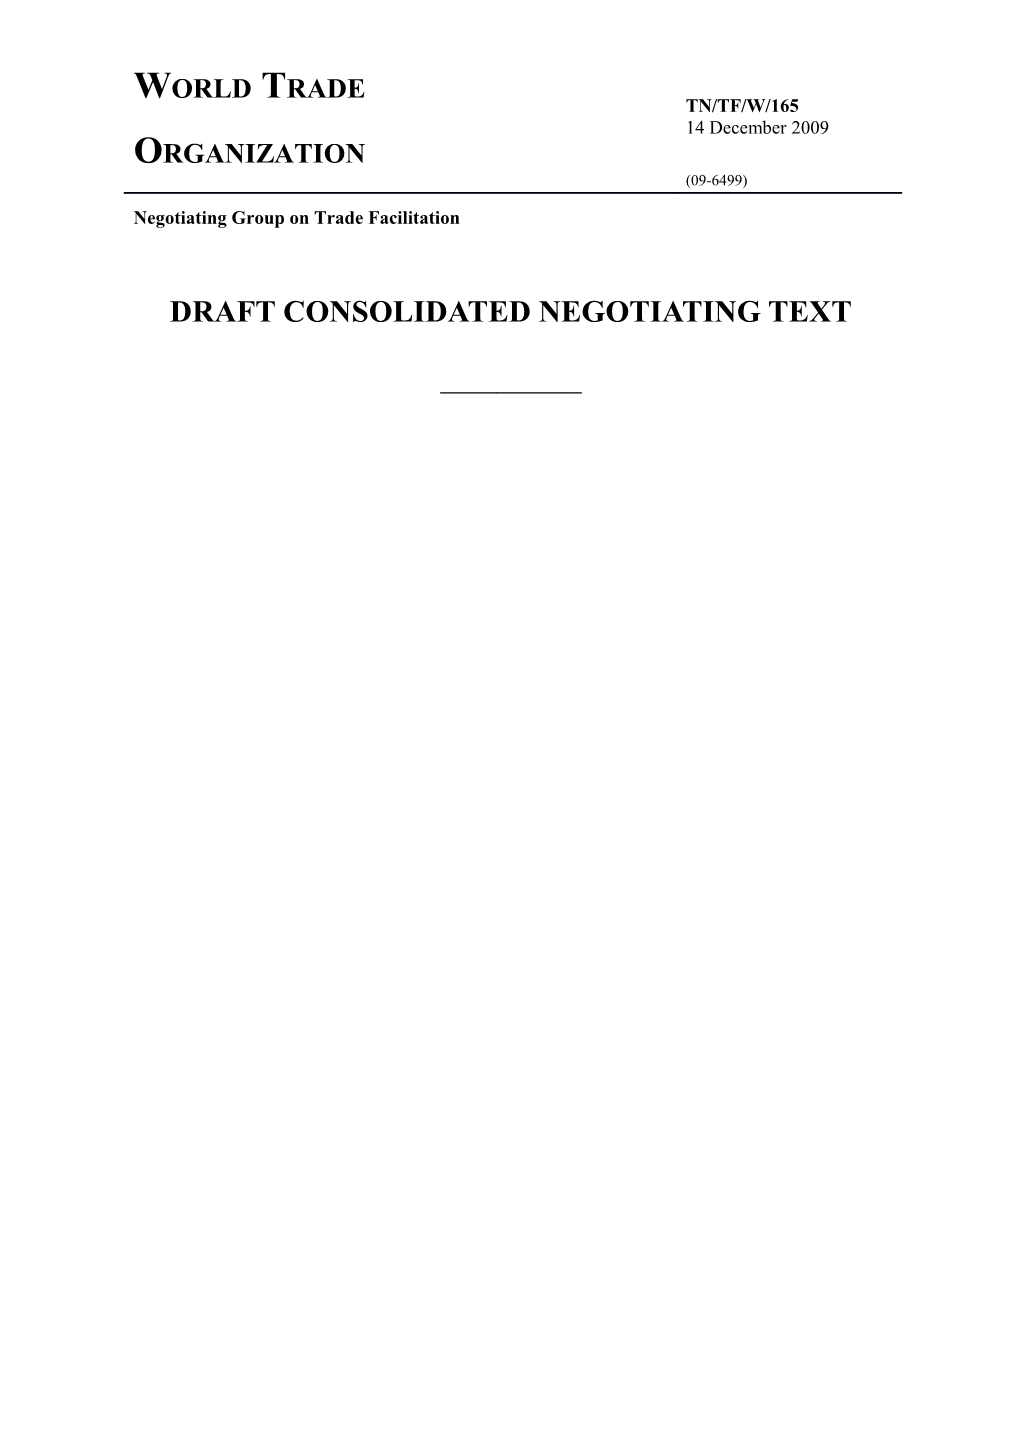 Draft Consolidated Negotiating Text